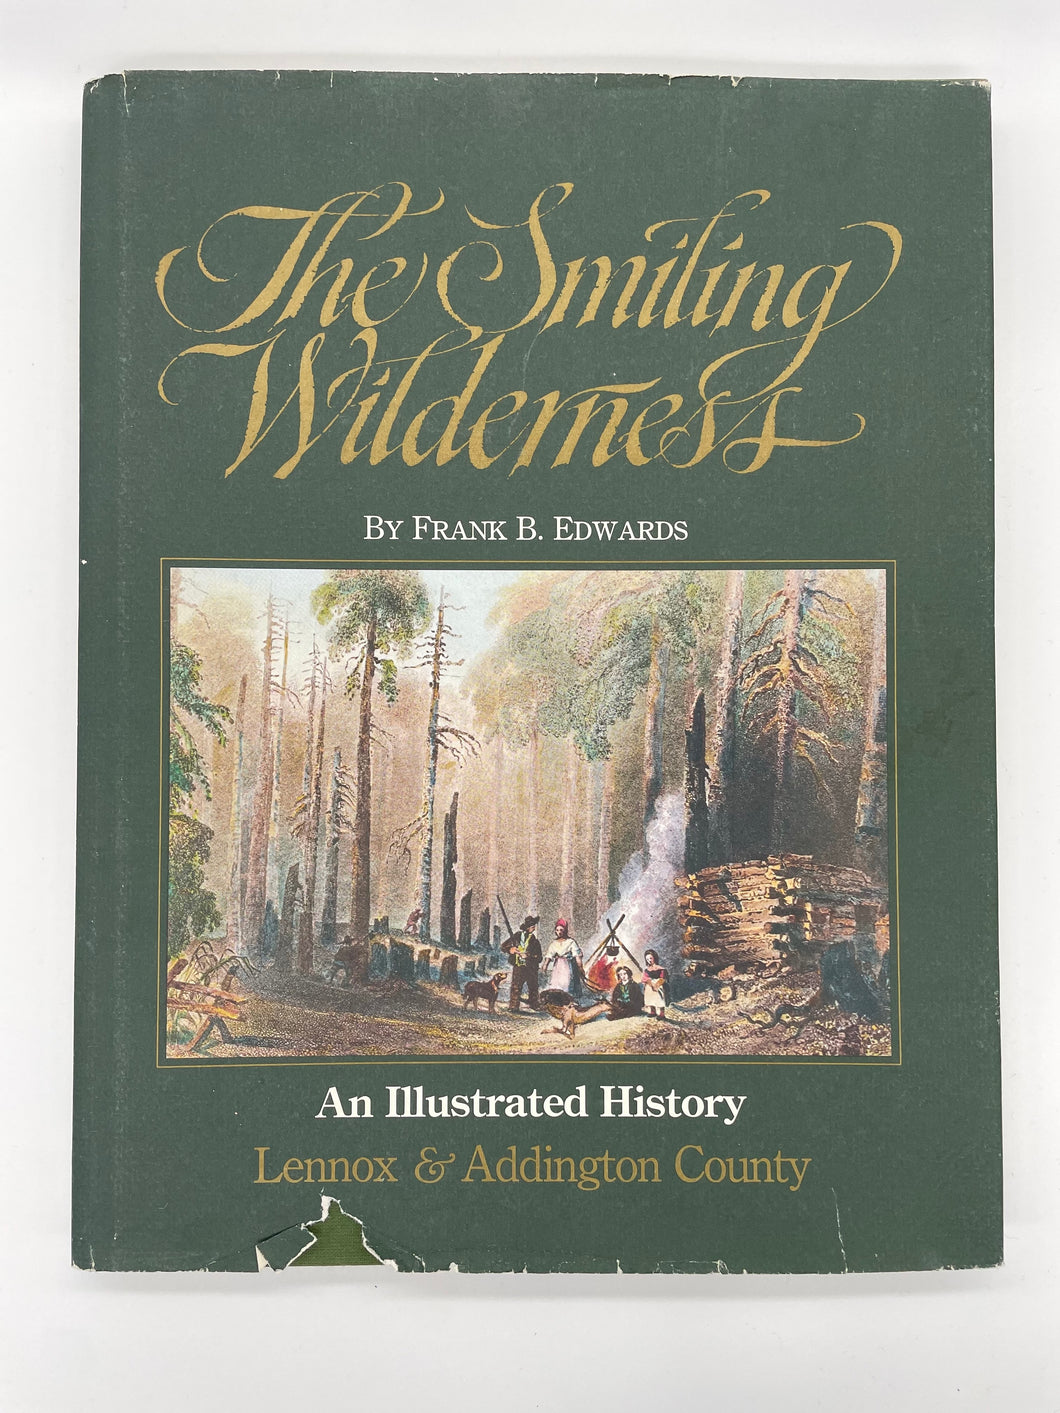 The Smiling Wilderness: An Illustrated History - Lennox & Addington County